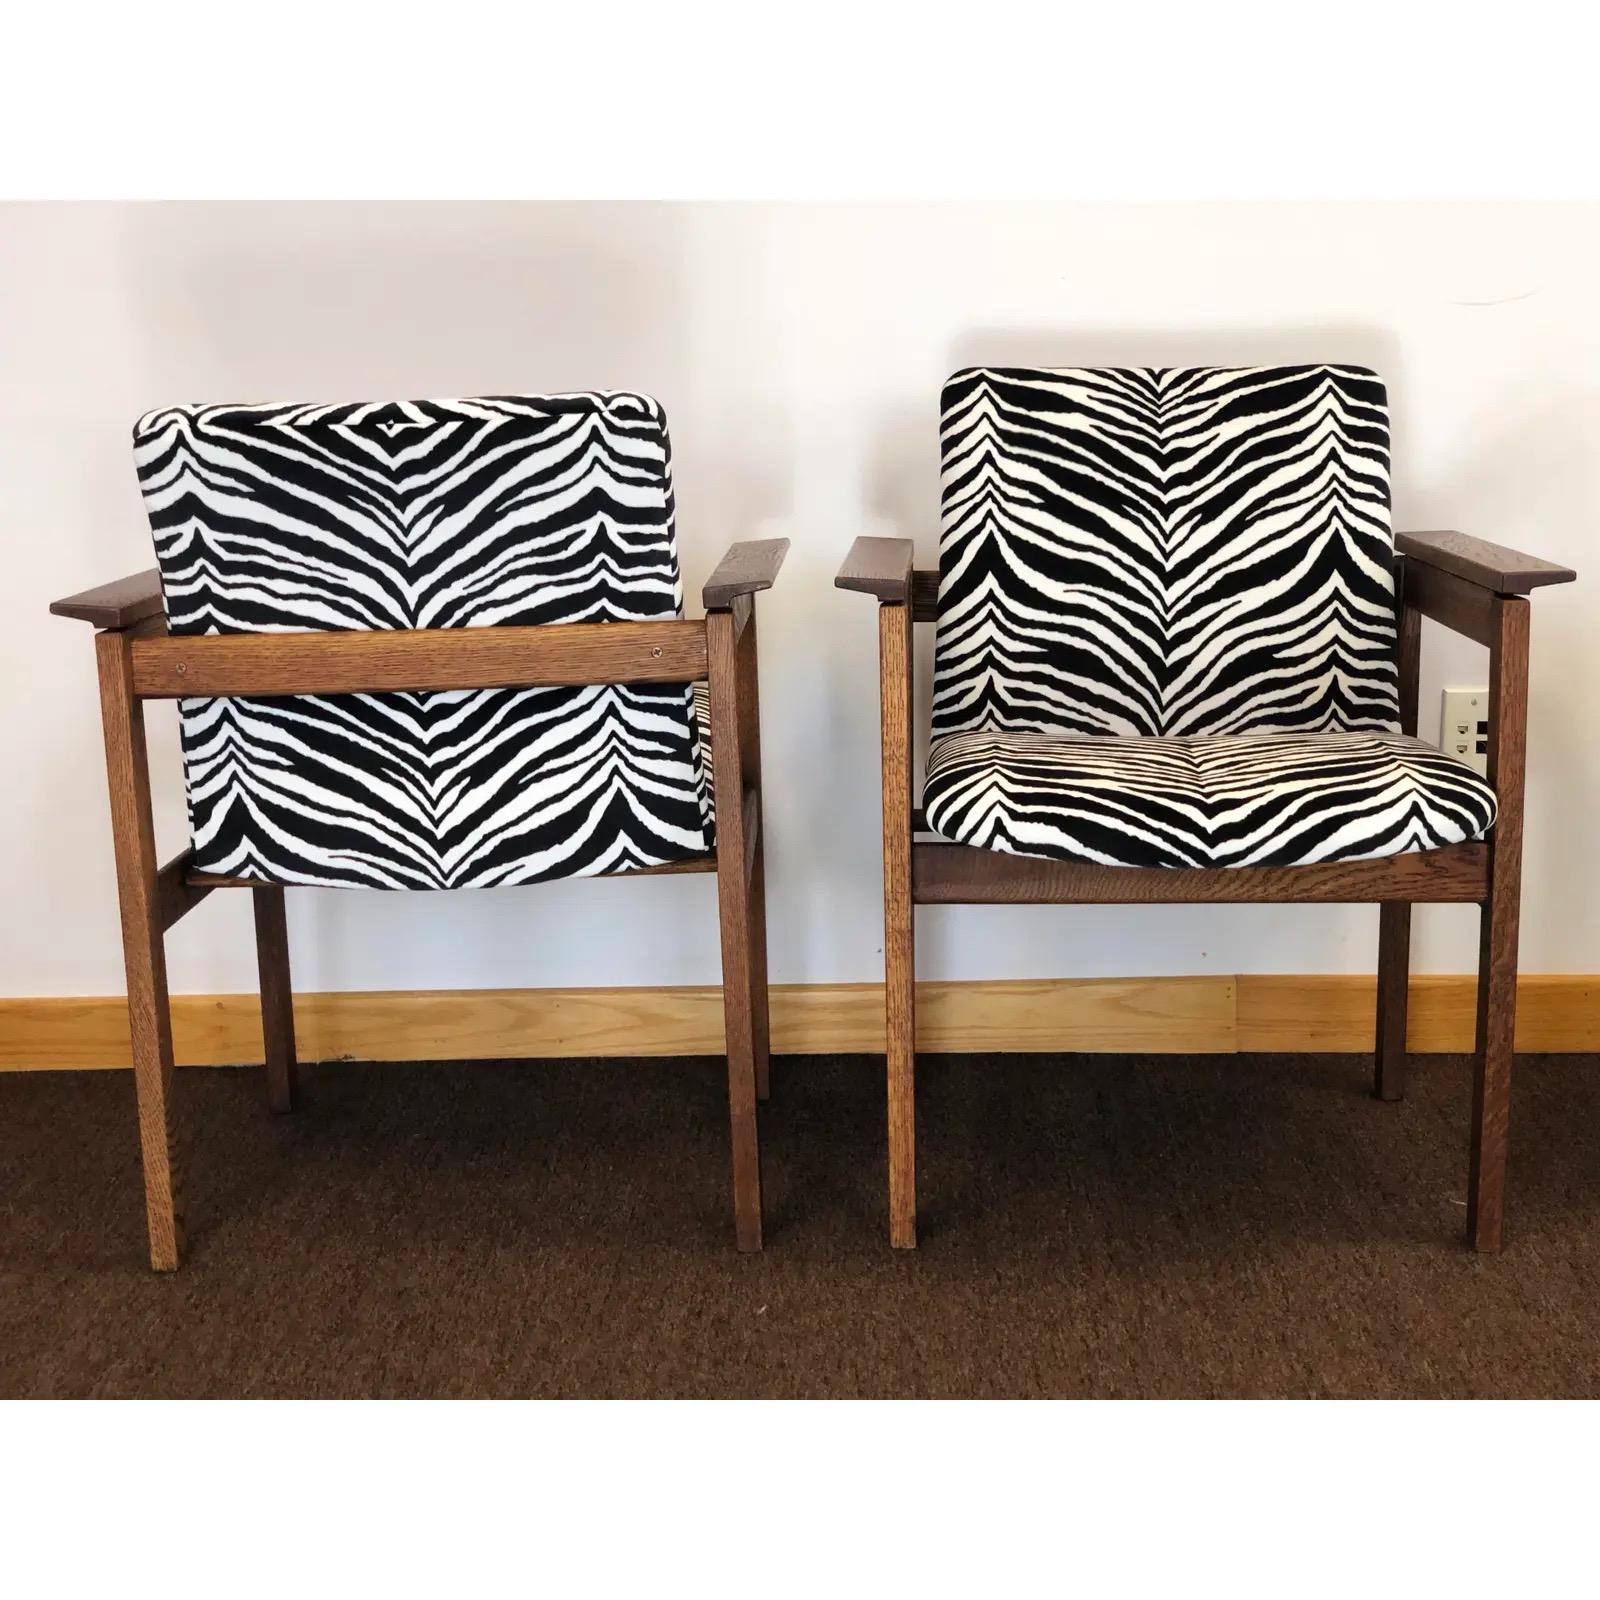 We are very pleased to offer a Mid-Century Modern, gorgeous pair of lounge chairs by Jens Risom, circa the 1960s. This fabulous set has been newly upholstered in a zebra stripe velvet upholstery. Marked on the bottom. In excellent condition and